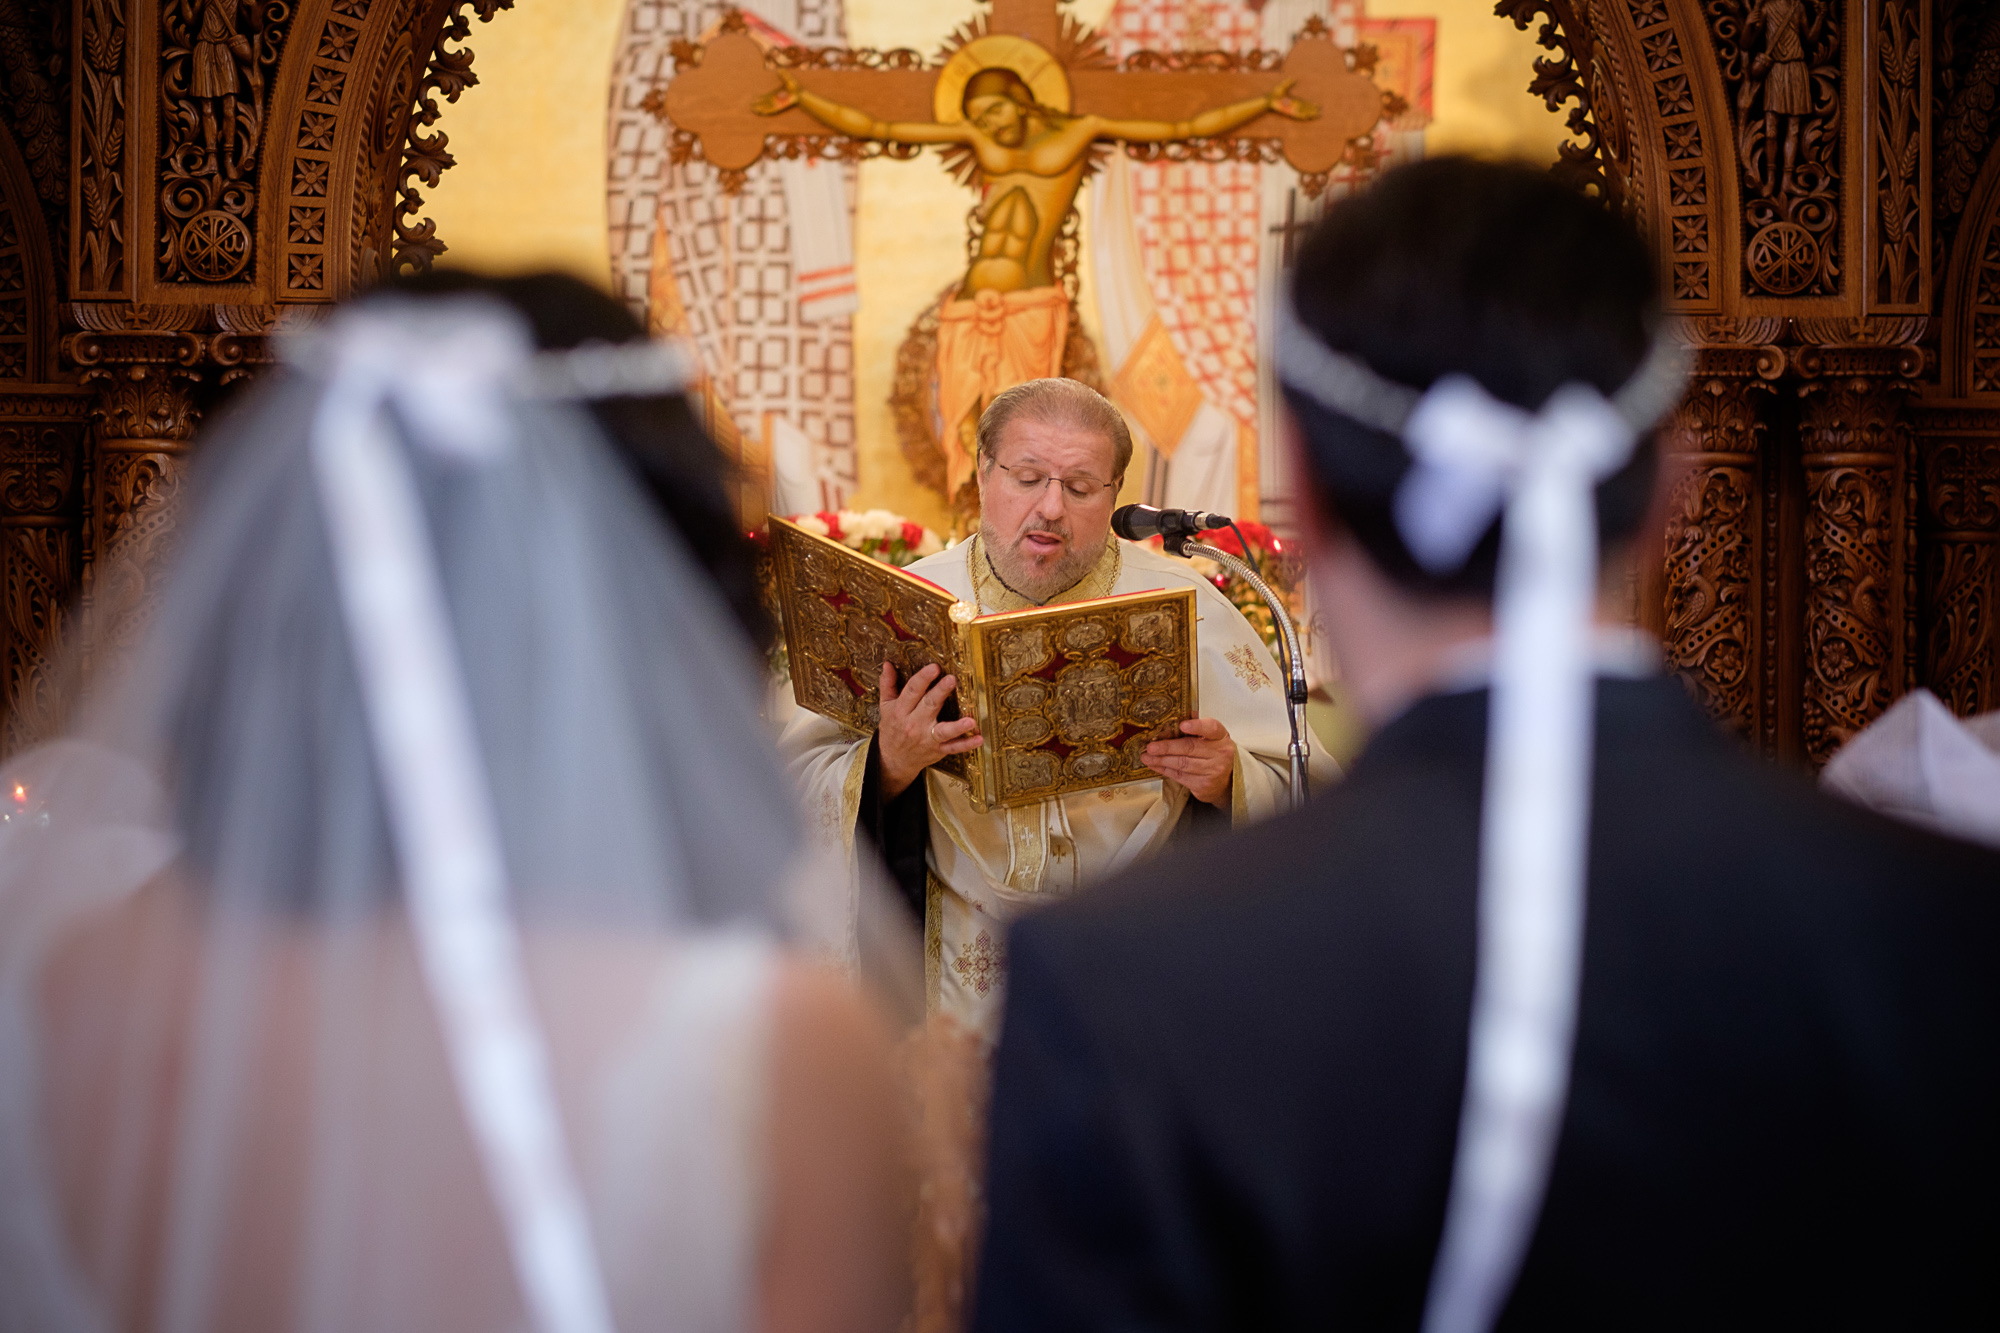  The priest blesses the couple during their wedding ceremony at a Toronto Greek Orthodox Church. 